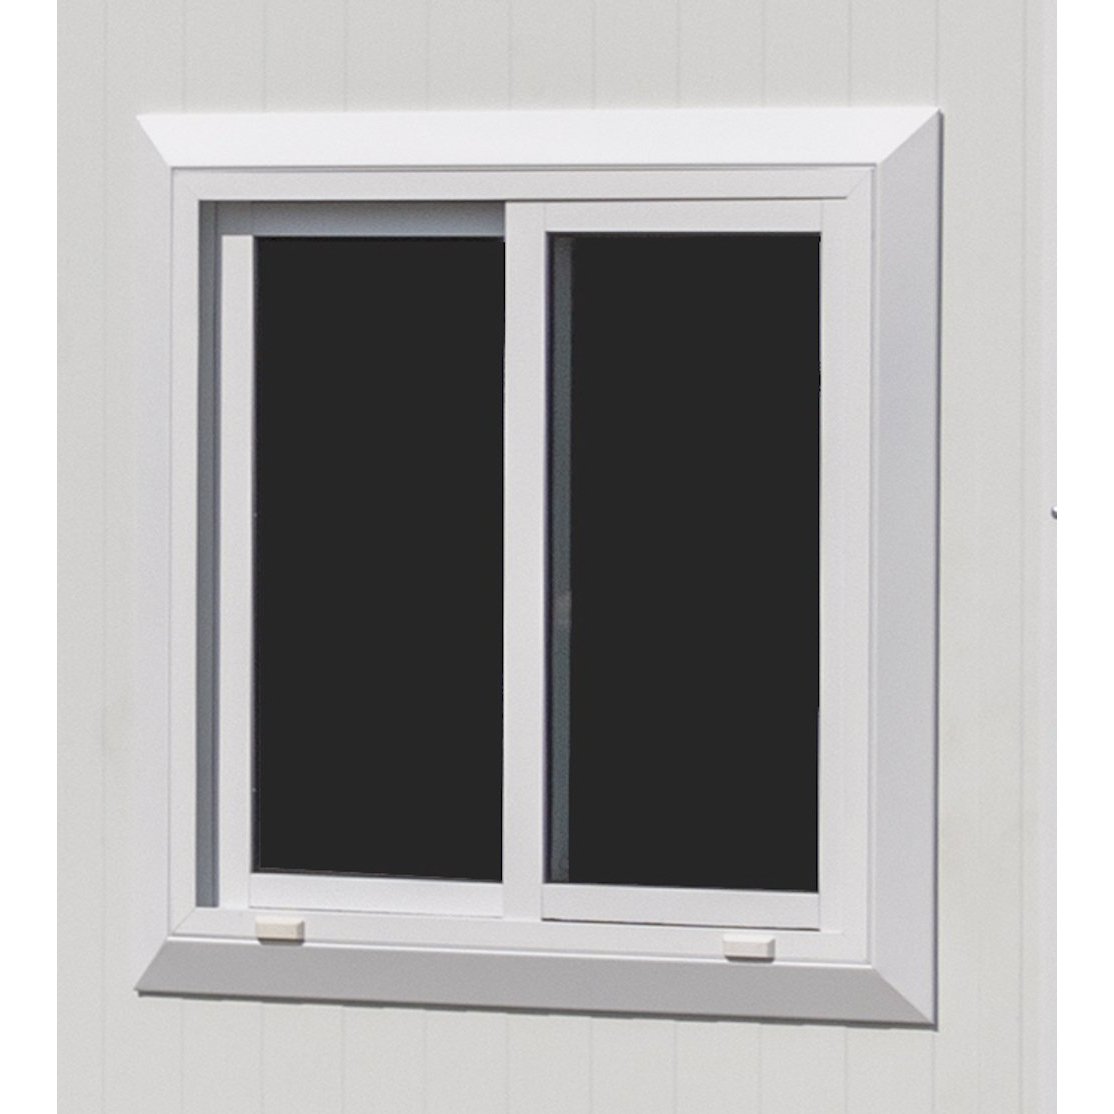 Duramax Insulated Buildings Window Kit 24" x 24" For Insulated Buildings